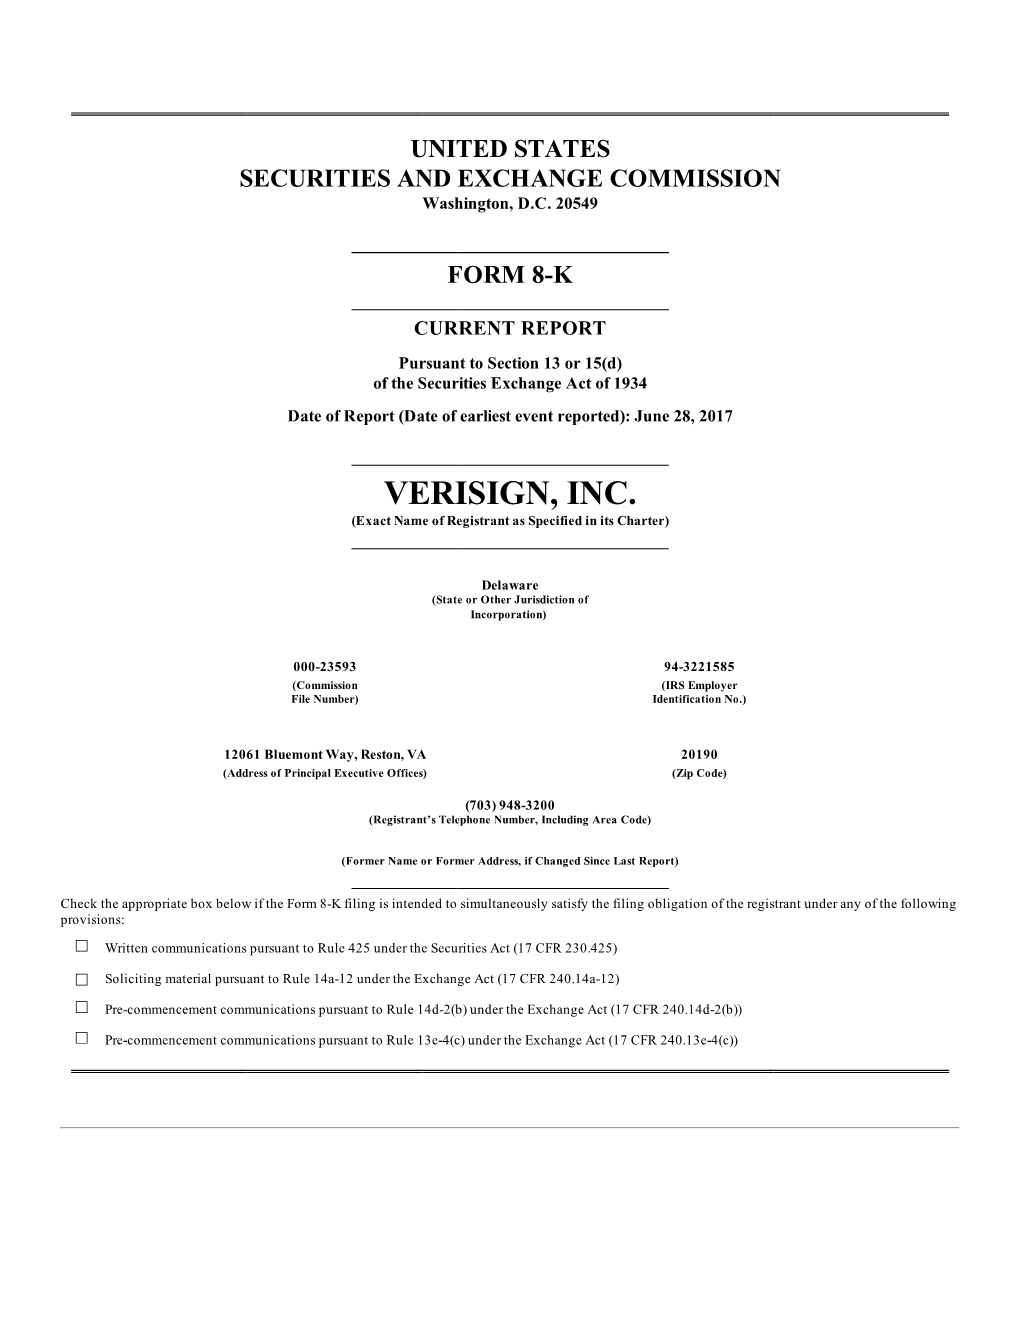 VERISIGN, INC. (Exact Name of Registrant As Specified in Its Charter)